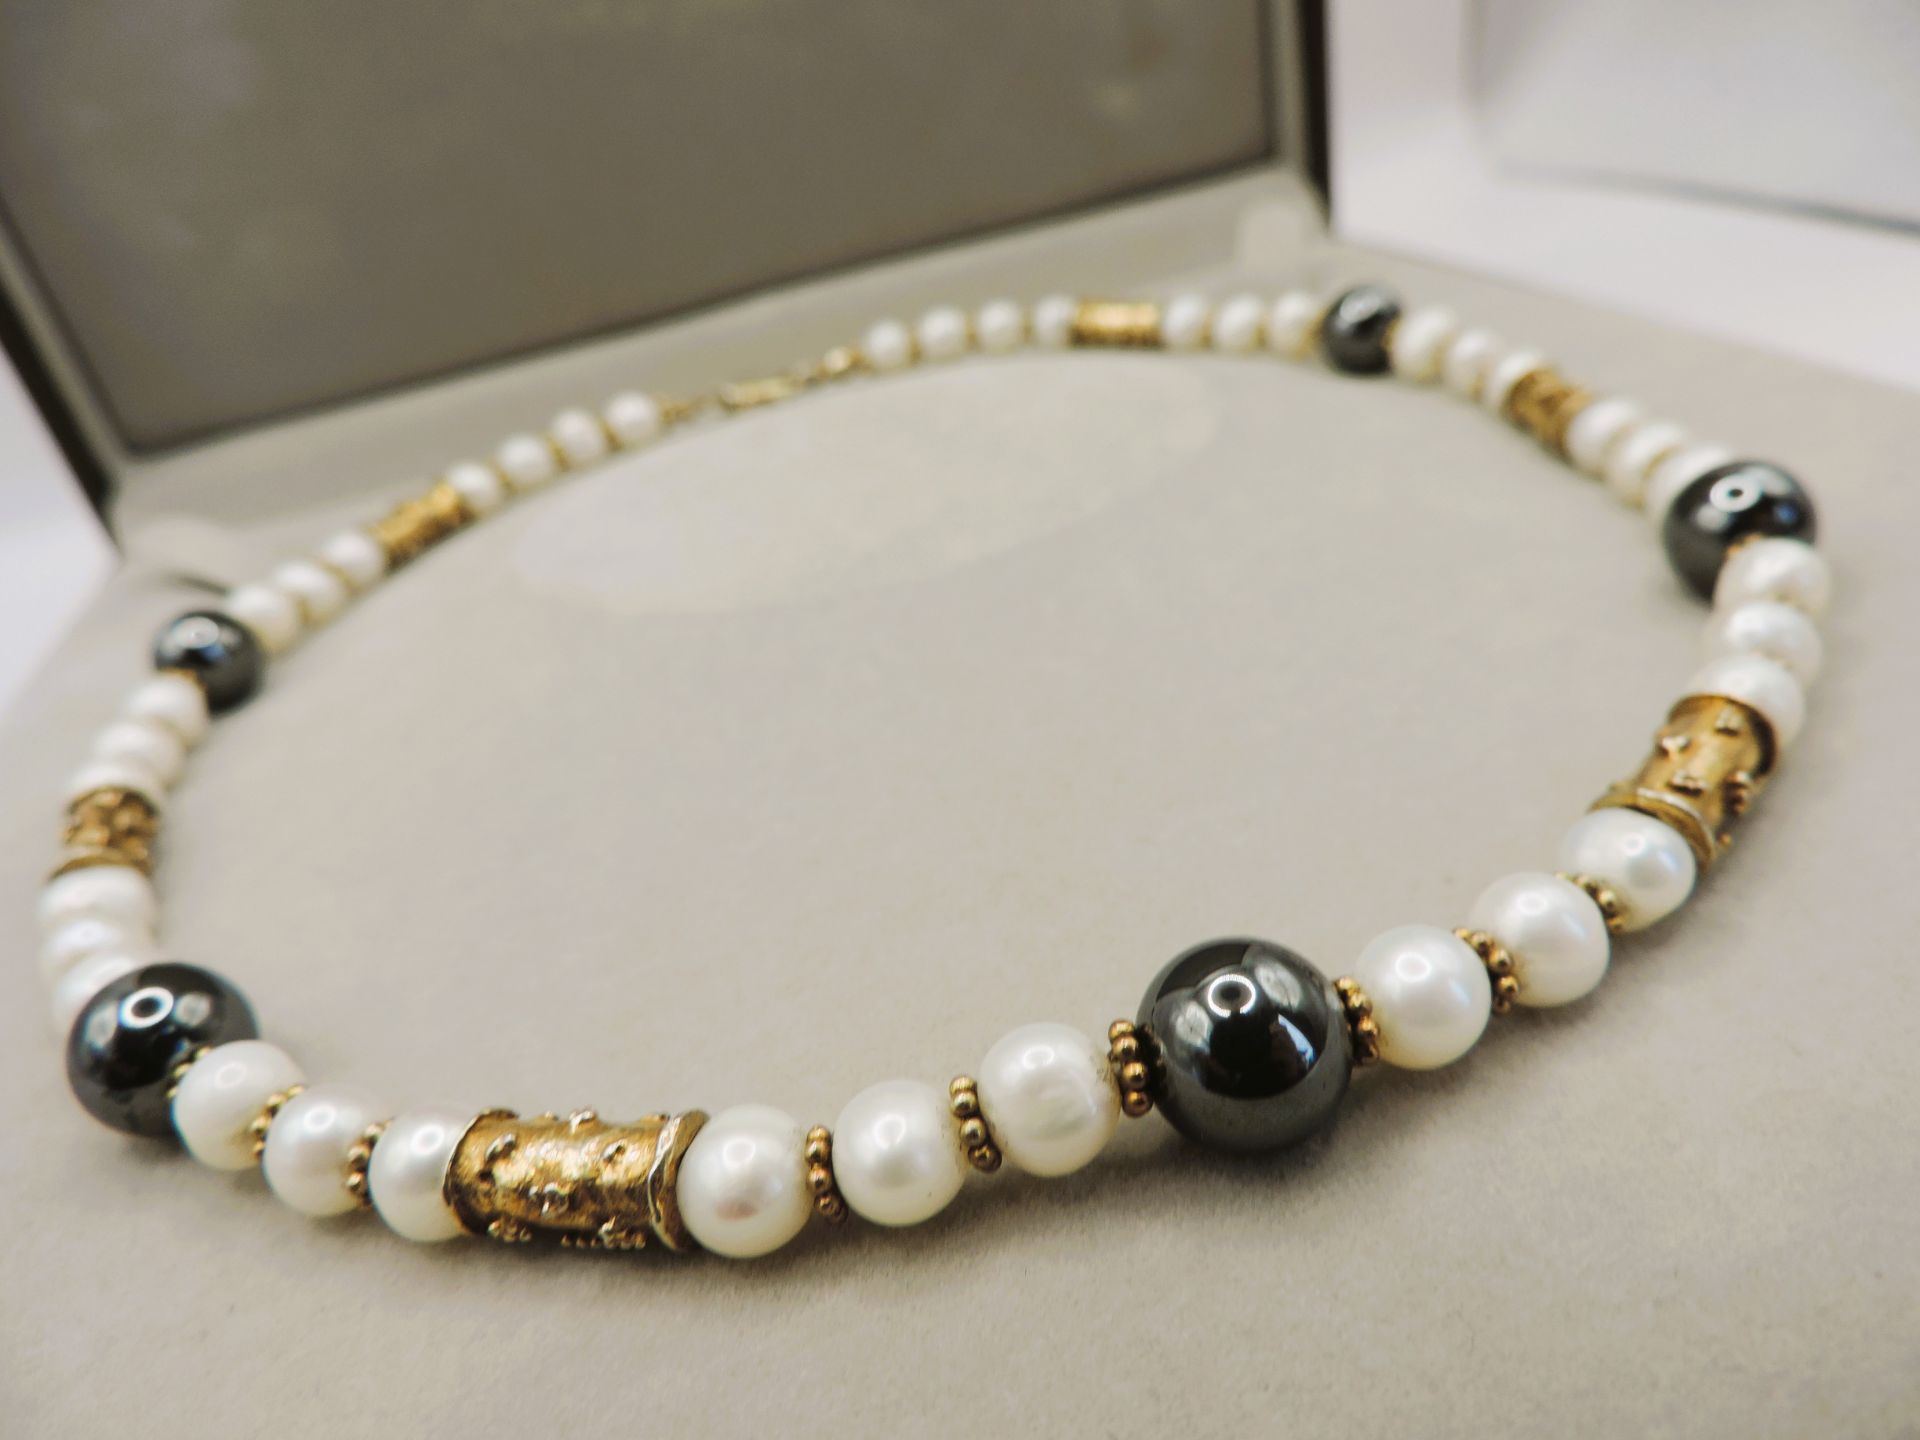 Gold on Silver Cultured Pearl & Bead Necklace with Gift Box - Image 4 of 7